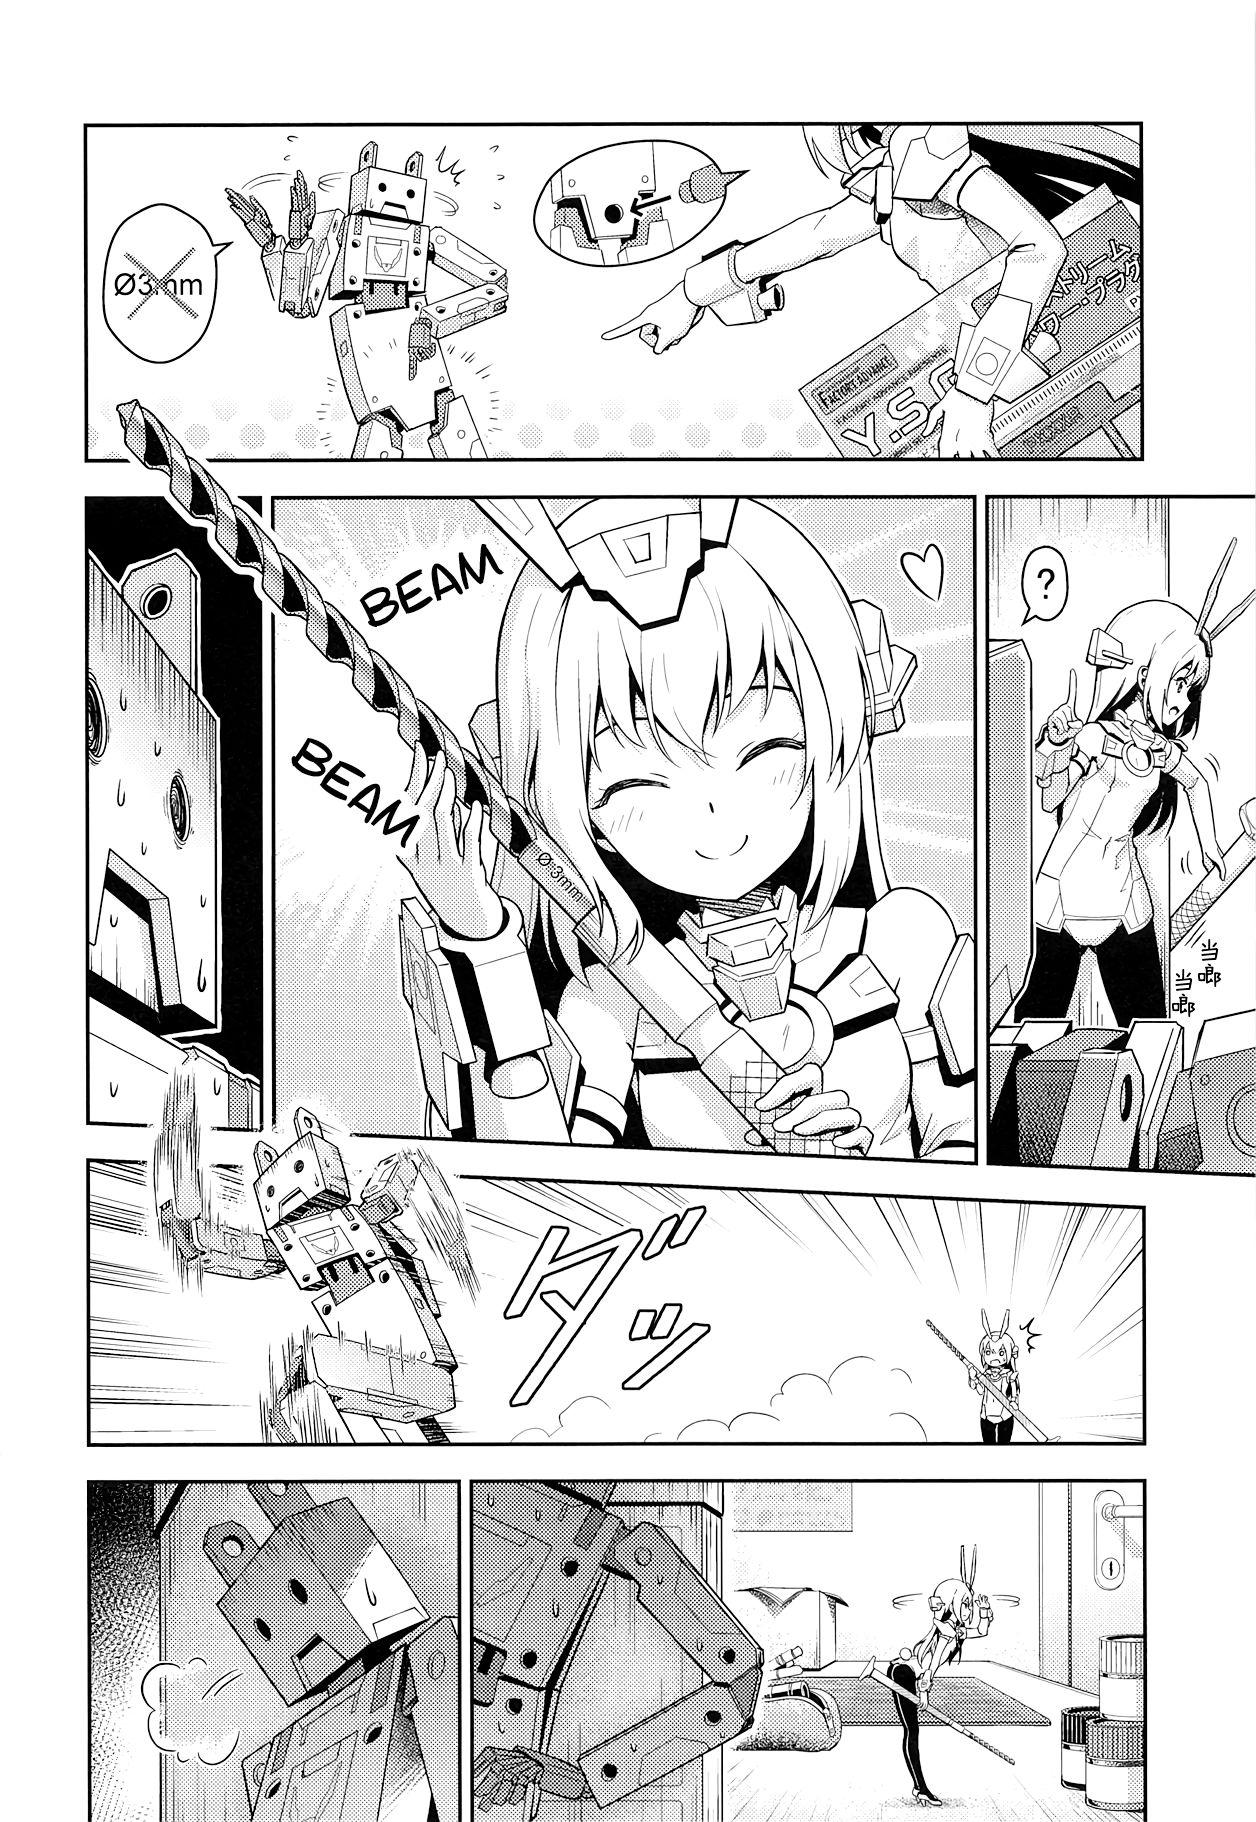 Parties Base, Juuden Shitai! - Frame arms girl Tites - Page 5